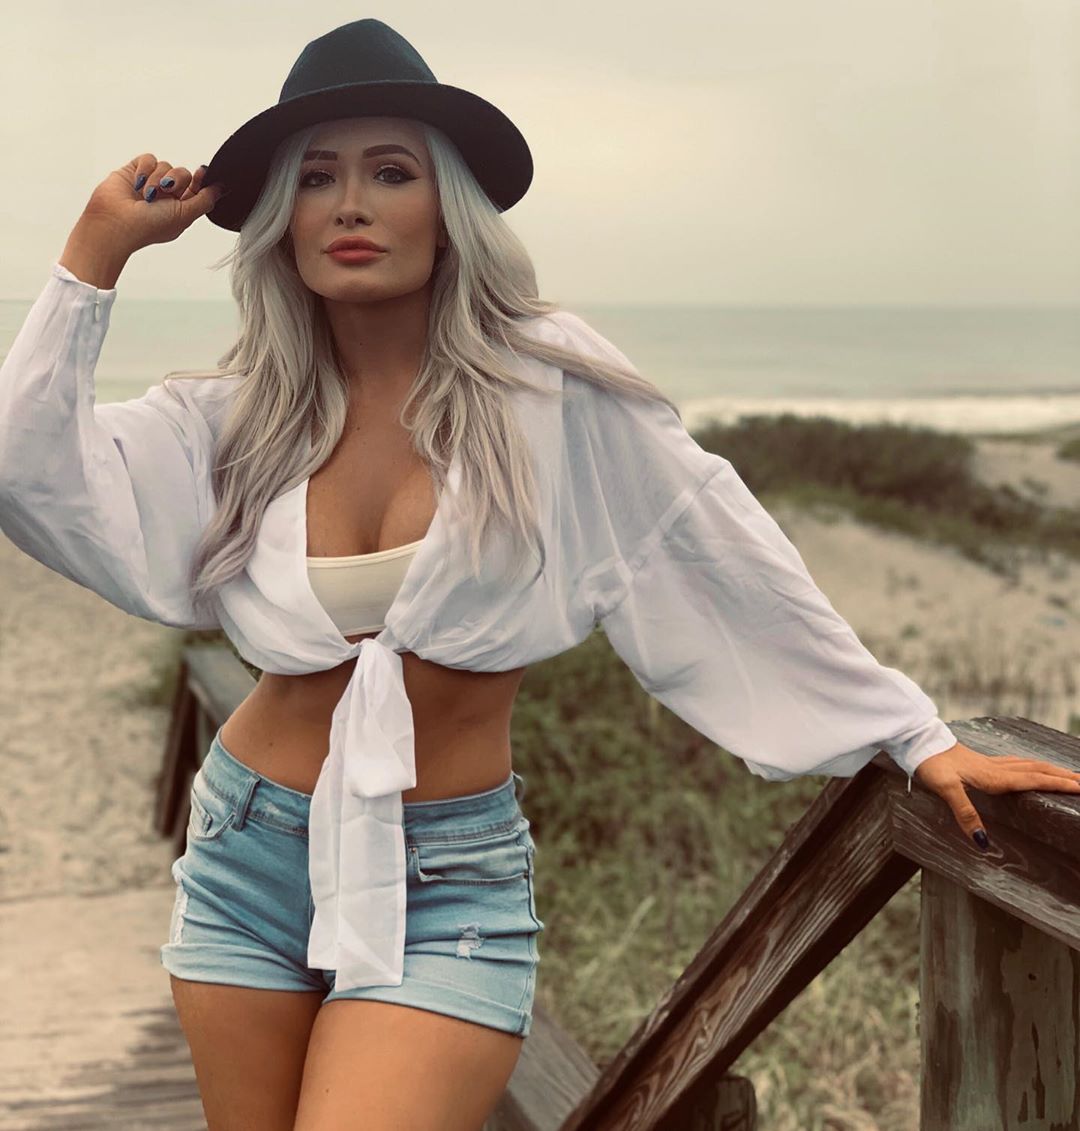 Scarlett Bordeaux Received So Many Custom Requests on OnlyFans She Had to Suspend Them in Order to C - Photo 8